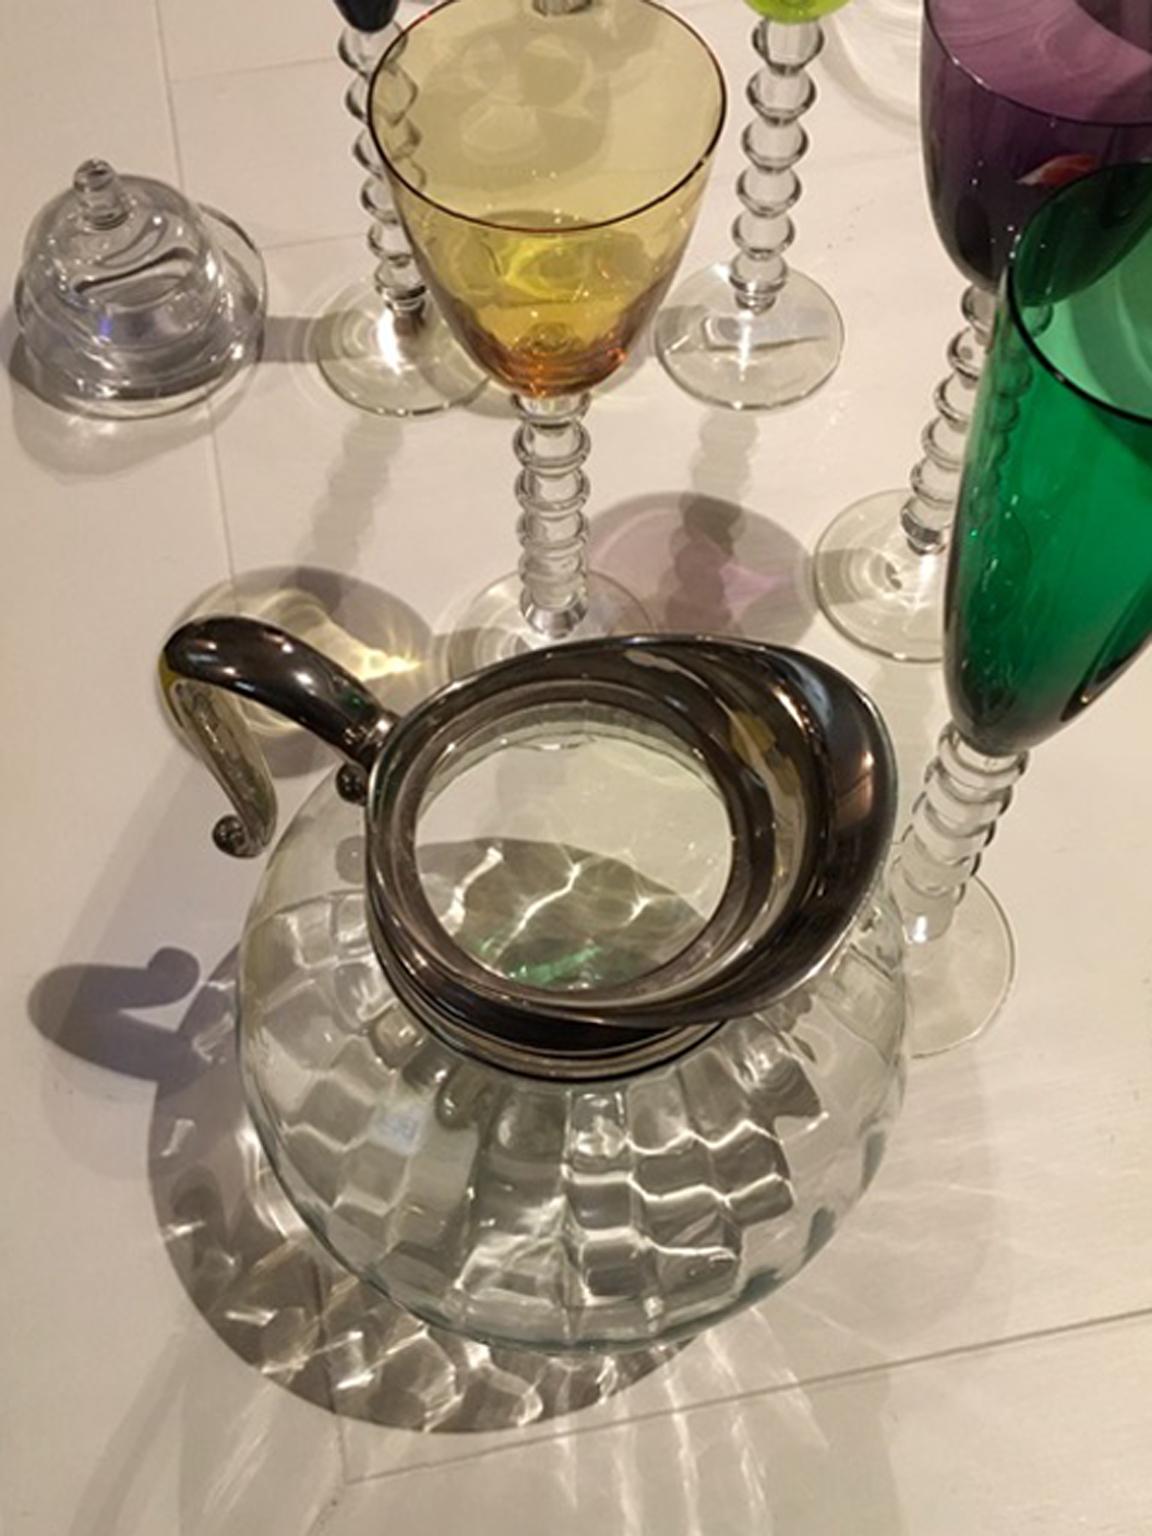 This water carafe is an elegant and useful piece of tableware, perfect for the Christmas tables.